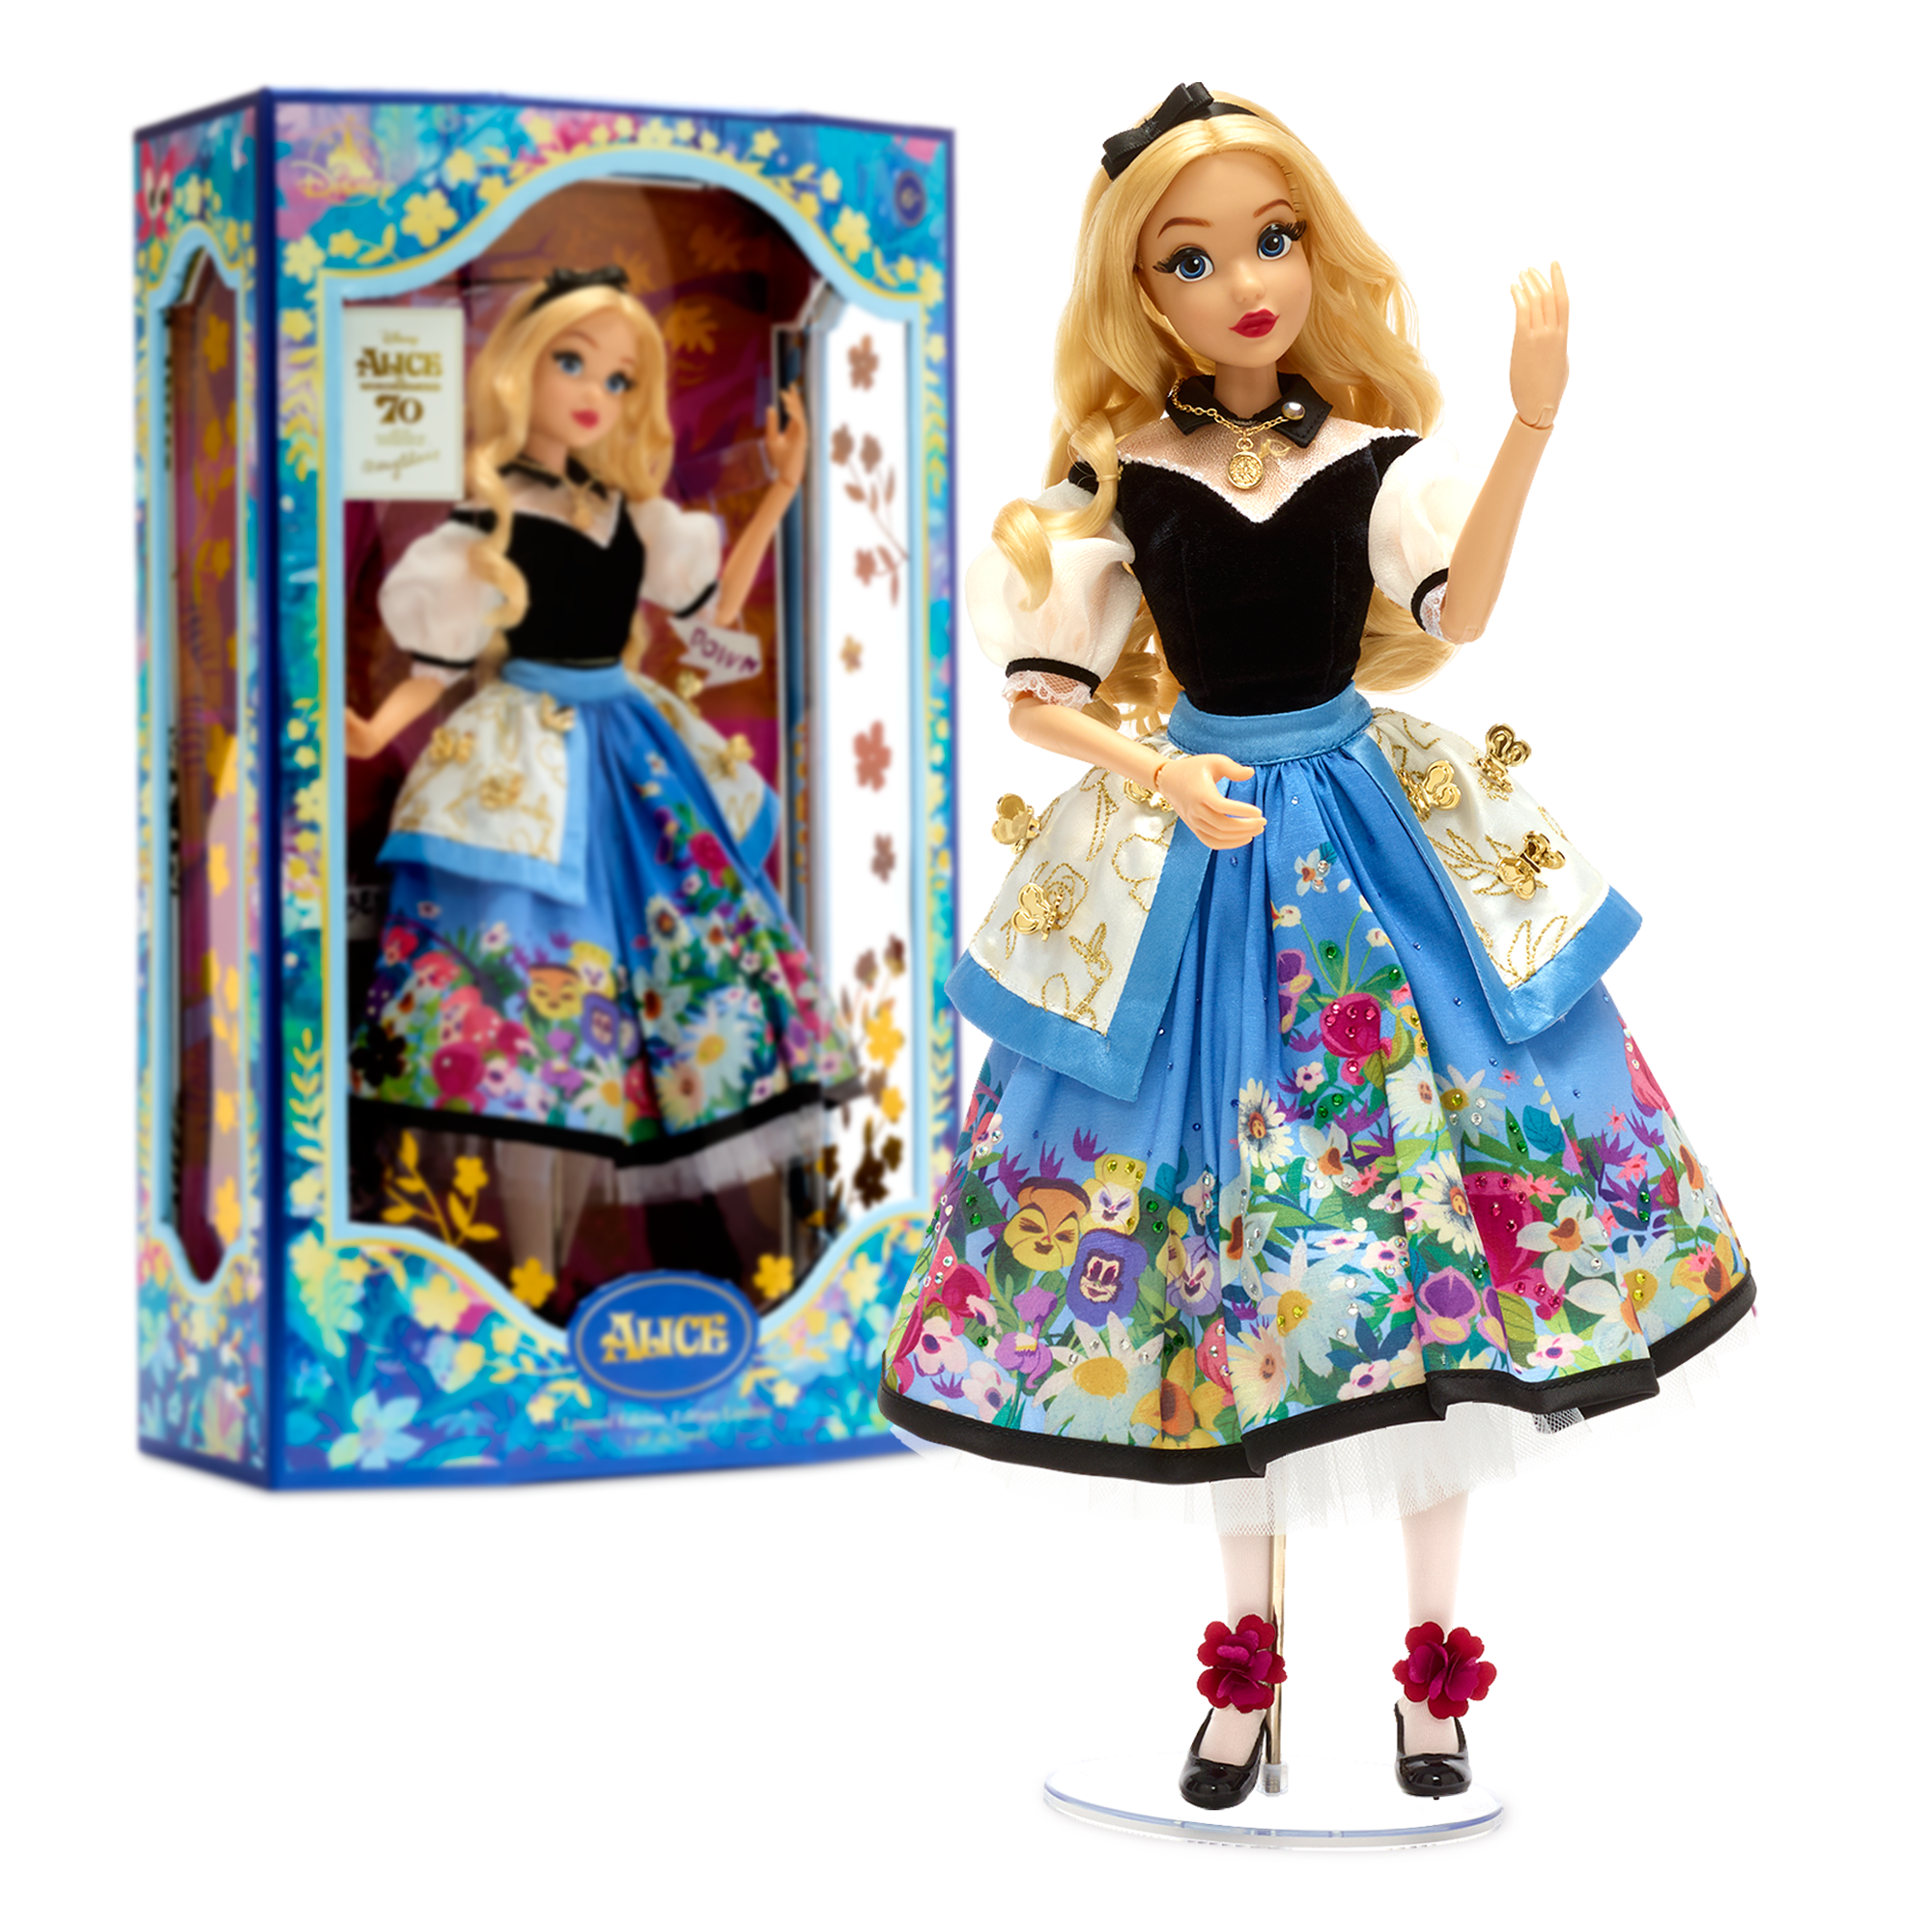 Celebrate 70 Years of Alice in Wonderland with New, Mary Blair